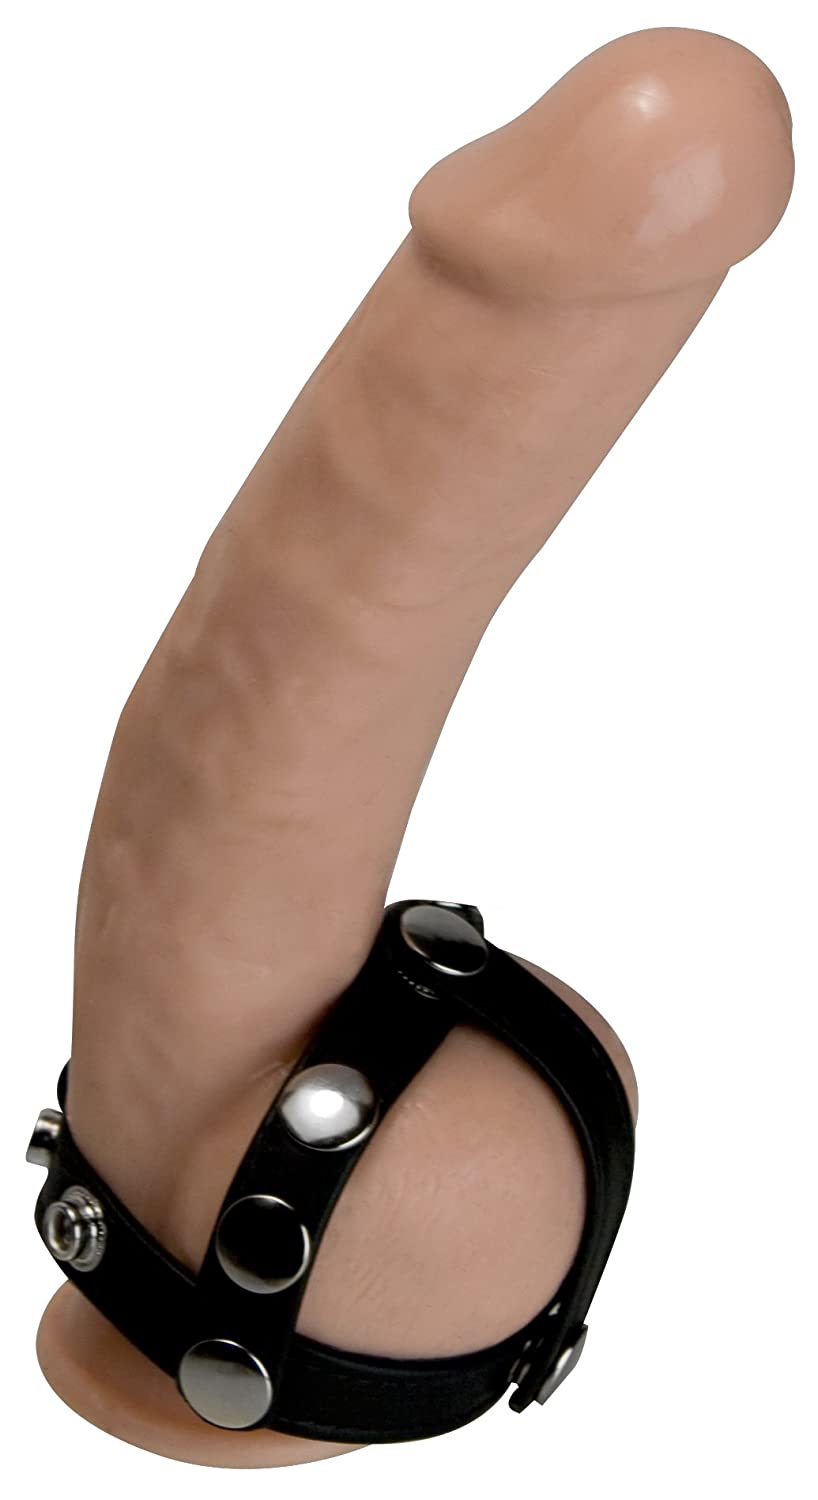 Spike reccomend Cock and ball holder